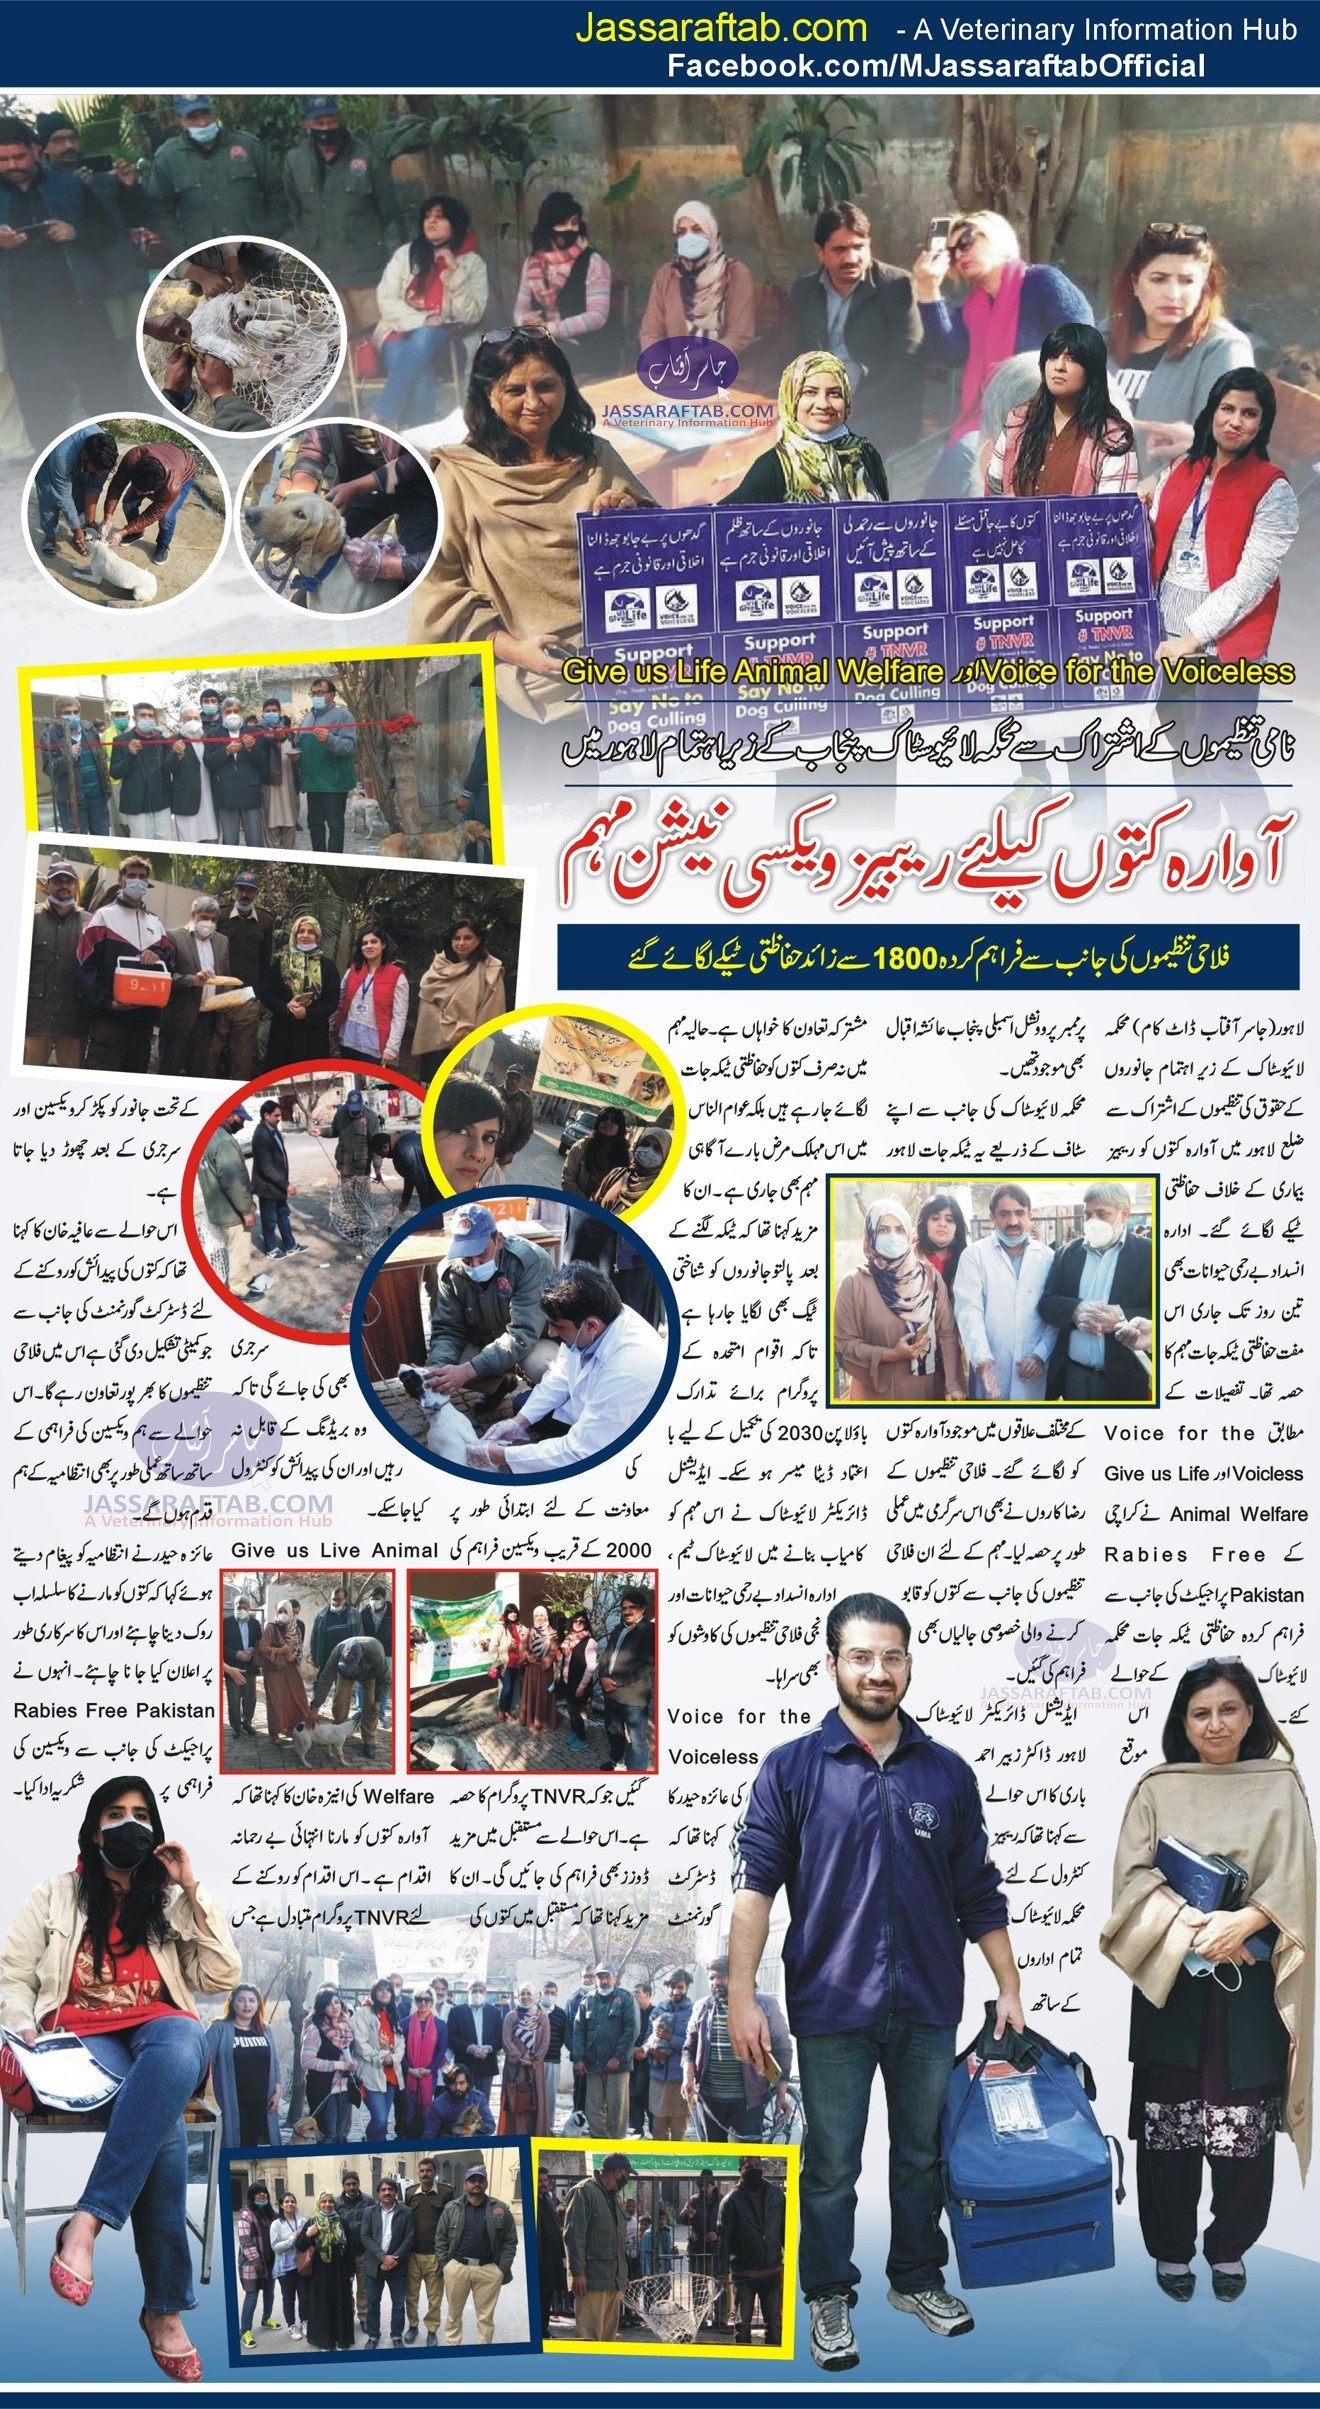 Rabies Vaccination of stray dogs, Rabies Free Pakistan, dog catching training and rabies awareness 